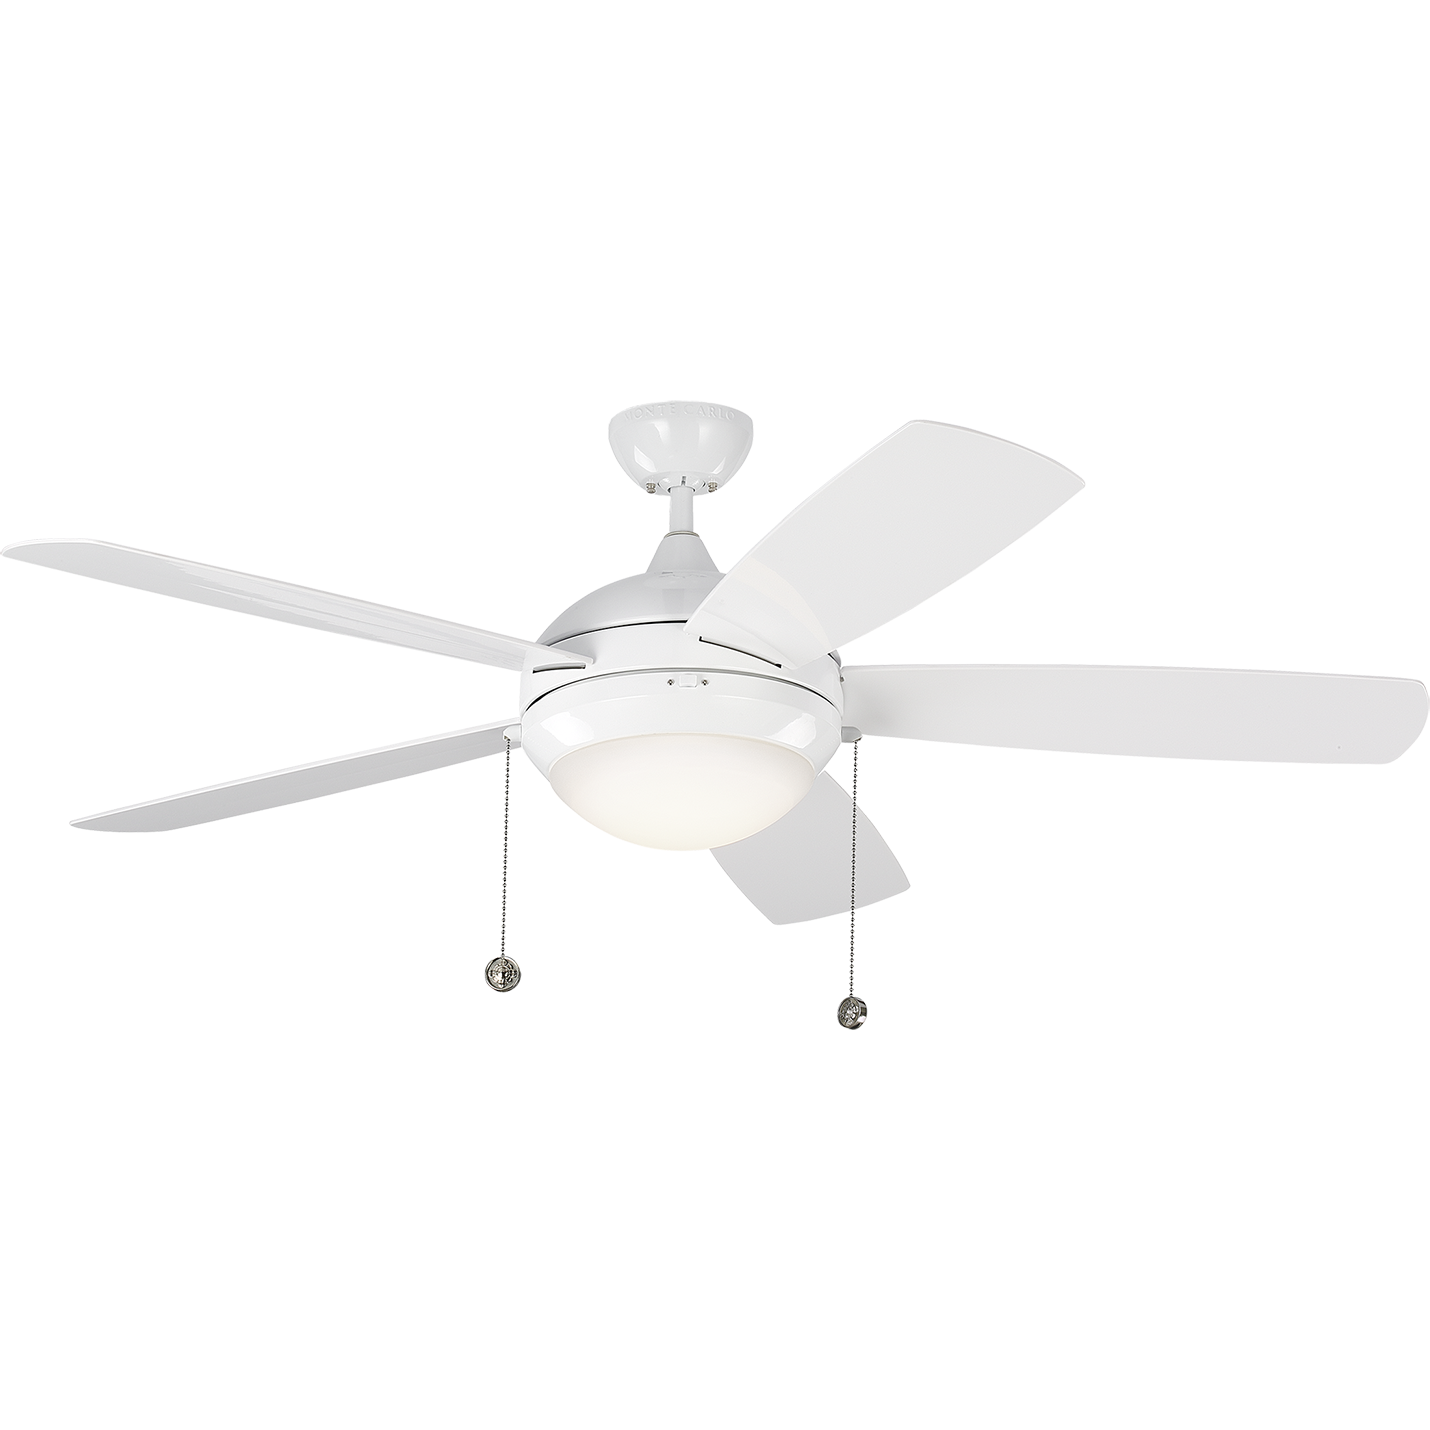 Discus Outdoor 52" LED Ceiling Fan